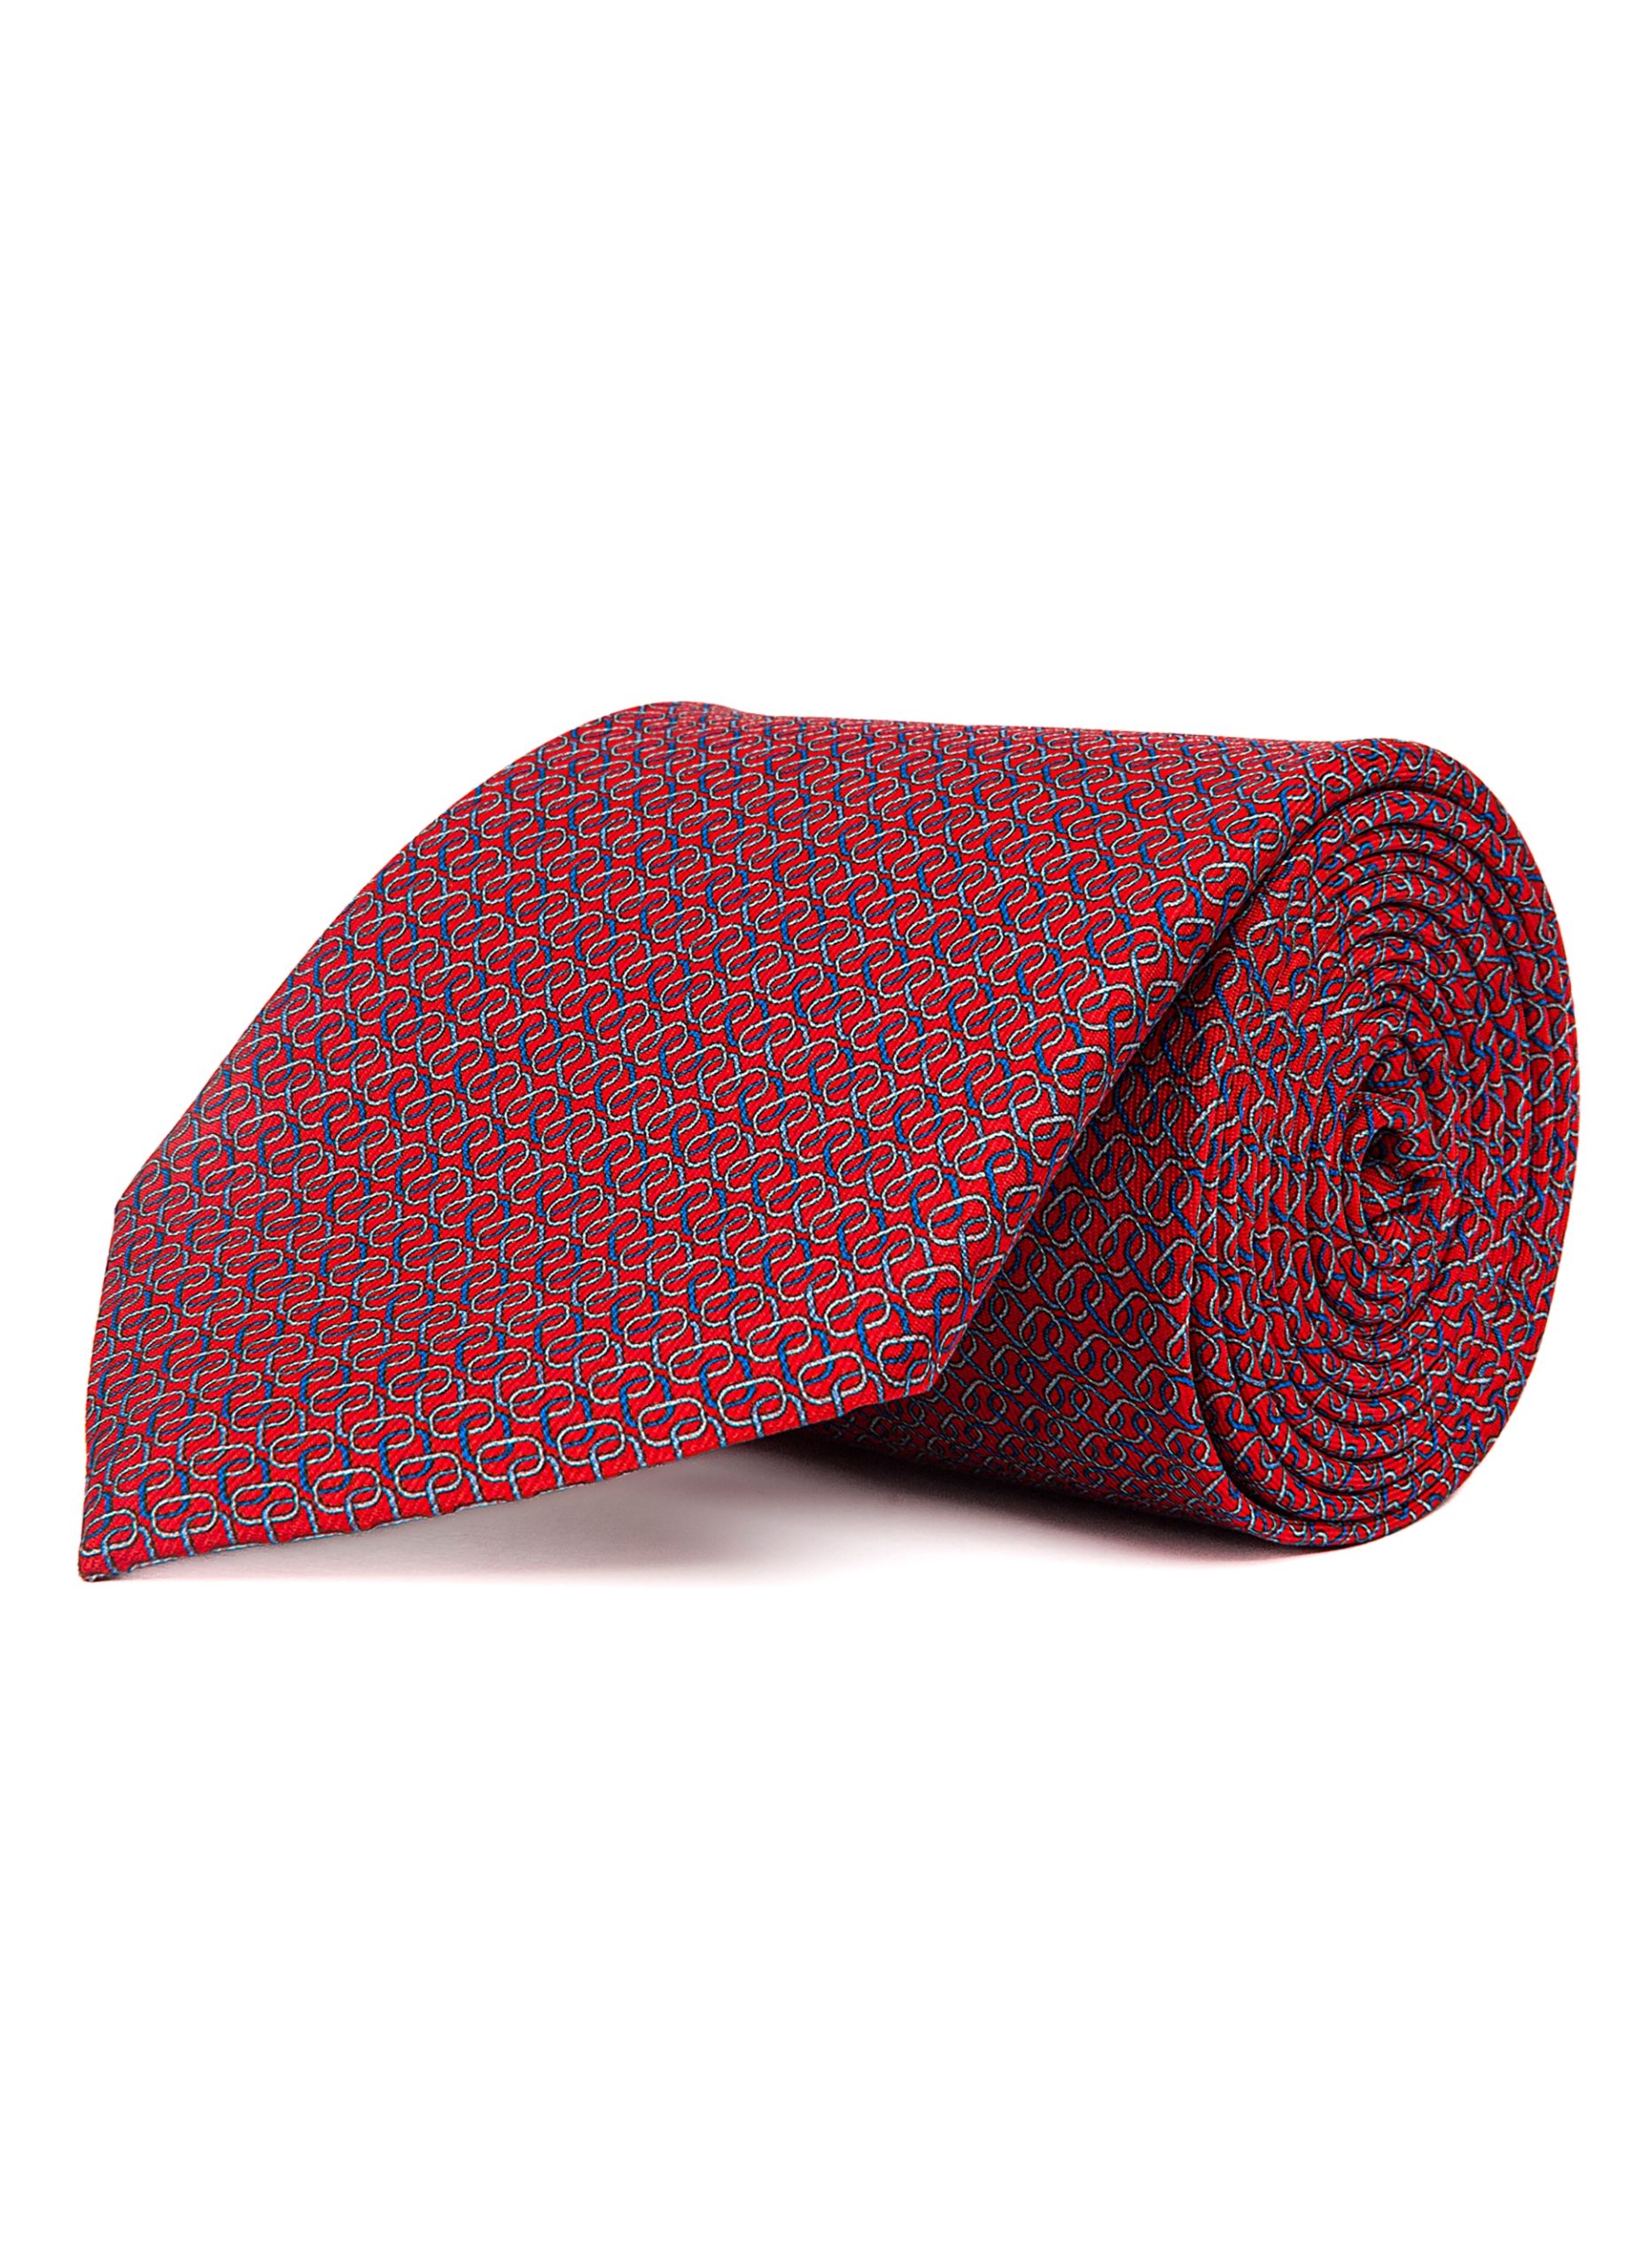 Roderick Charles red and blue London tie